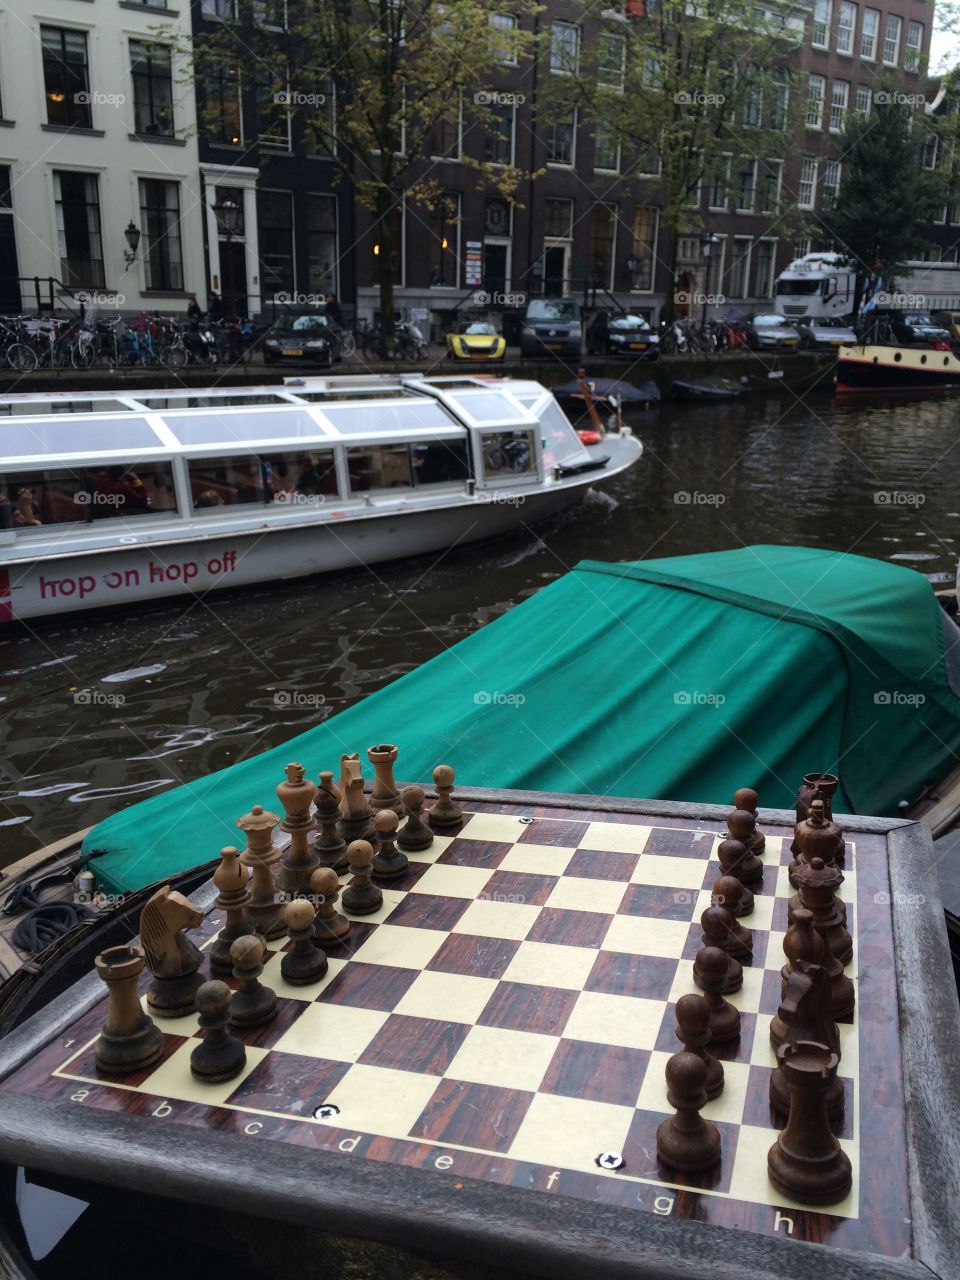 Chess board on Amsterdam canal 